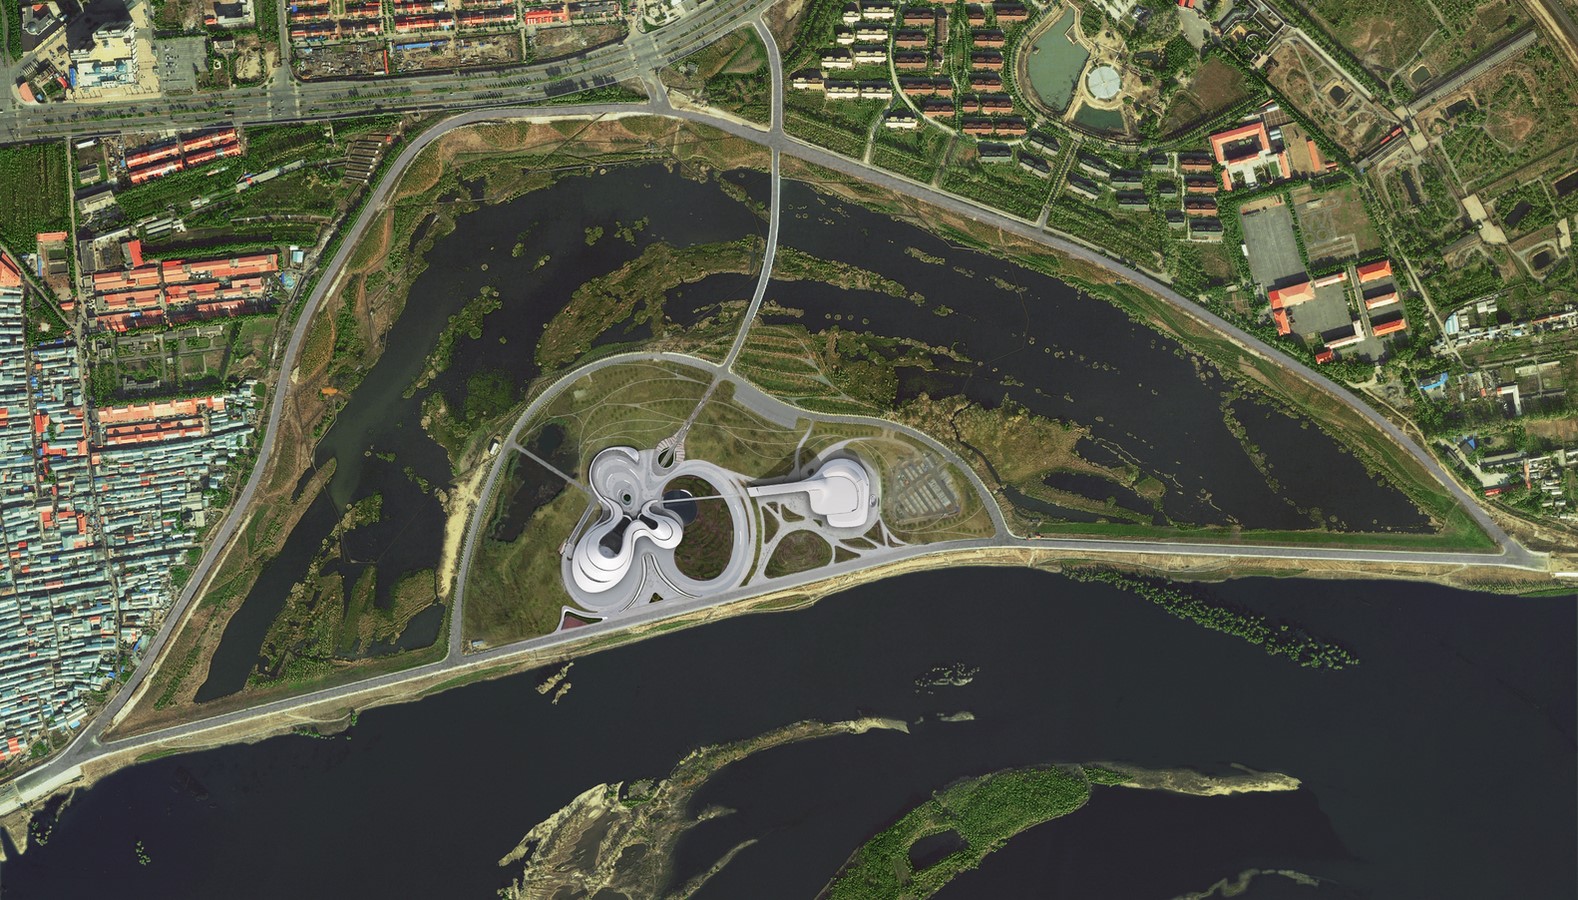 Harbin Opera House by MAD Architects: Design inspired by the surroundings - Sheet3